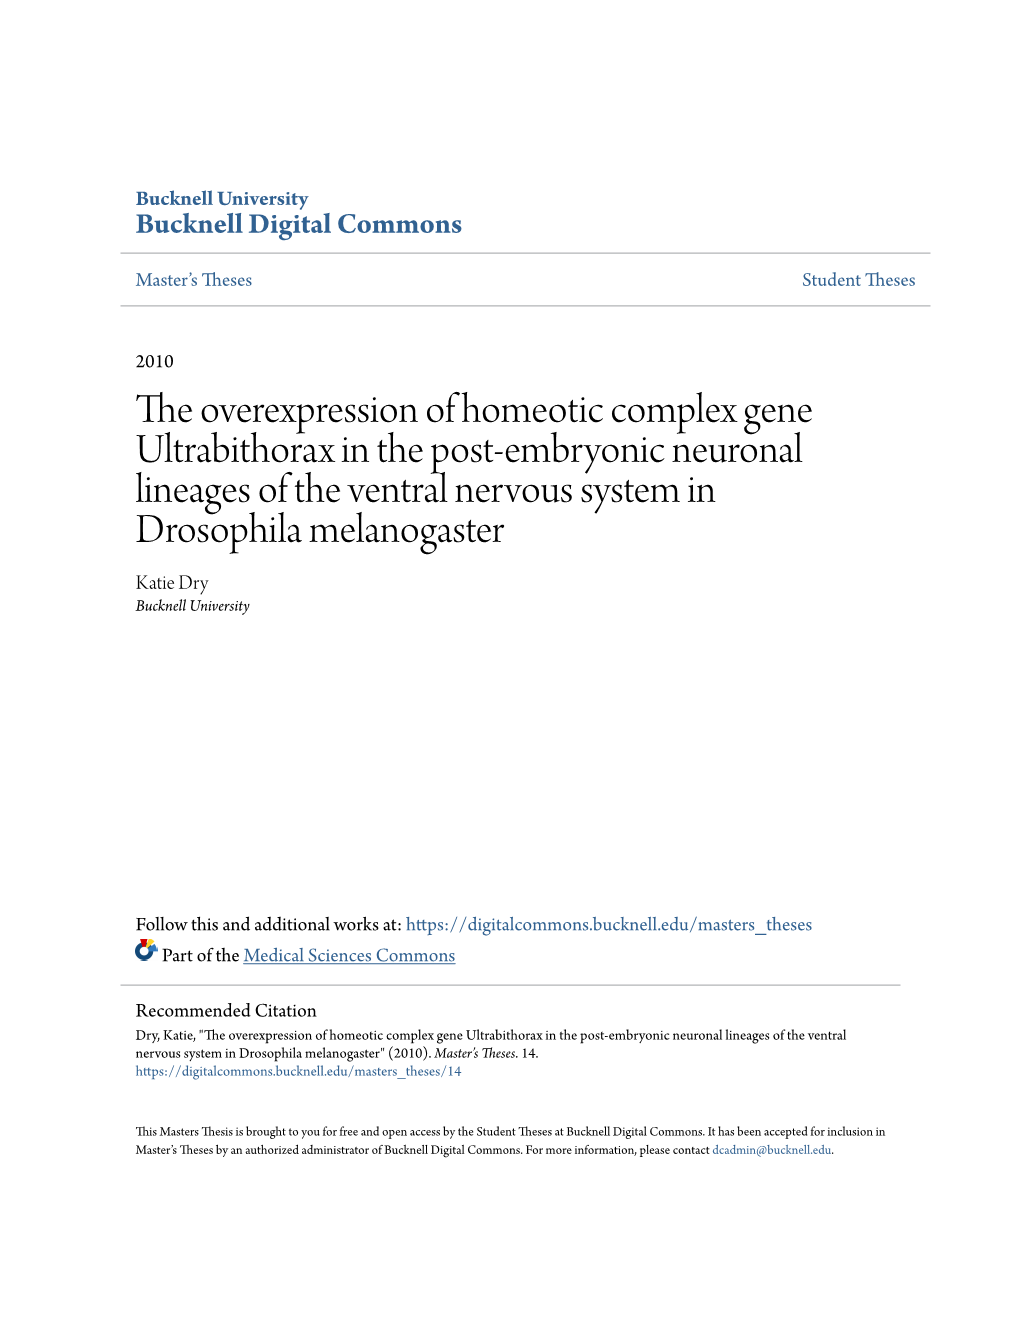 The Overexpression of Homeotic Complex Gene Ultrabithorax in The